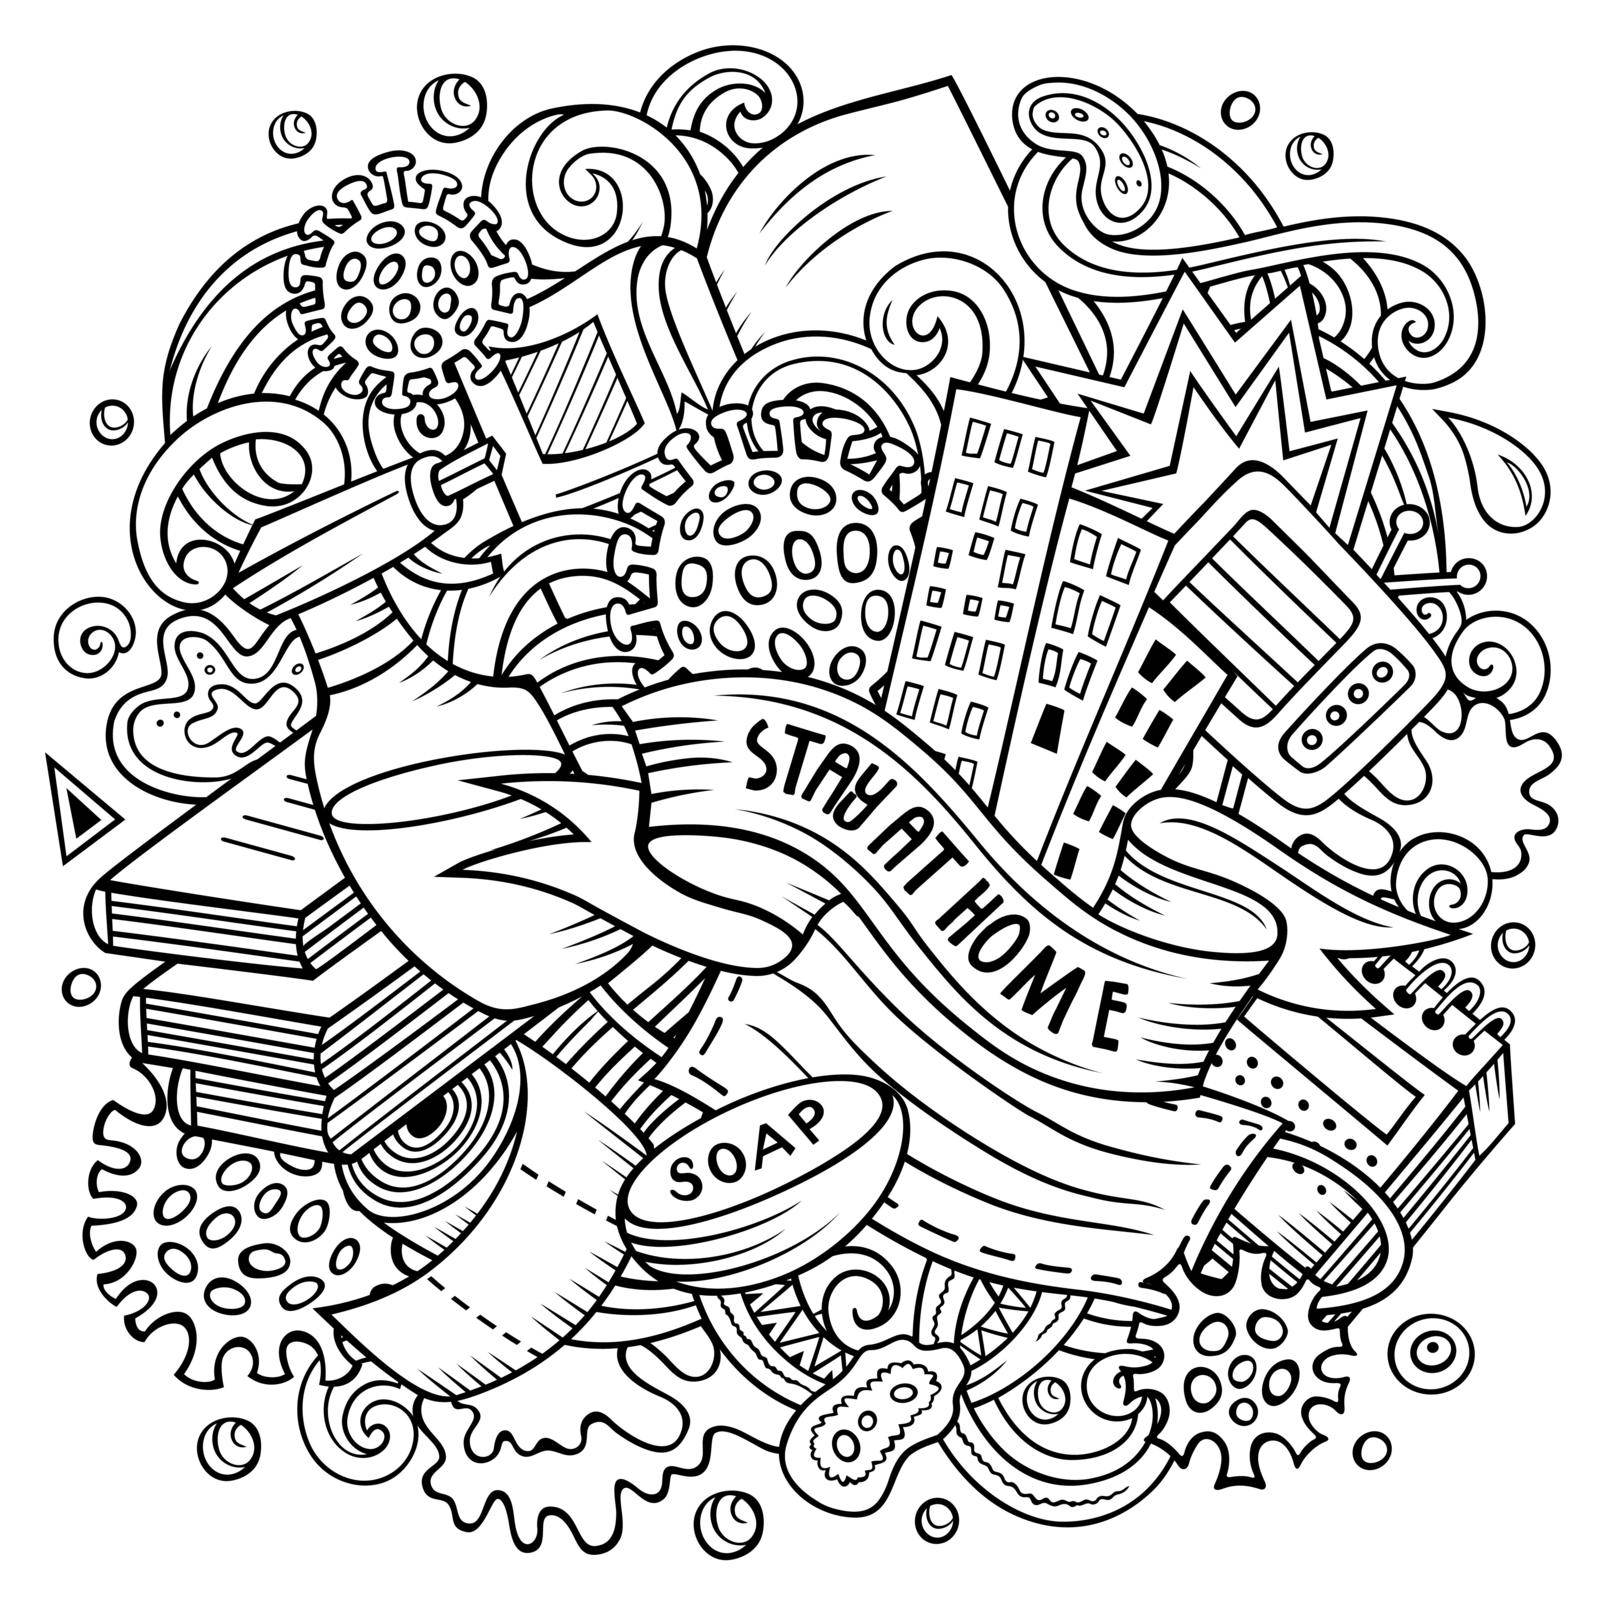 Cartoon vector doodles Stay at Home illustration. Line art, detailed, with lots of objects background. All objects separate. Sketchy epidemic picture